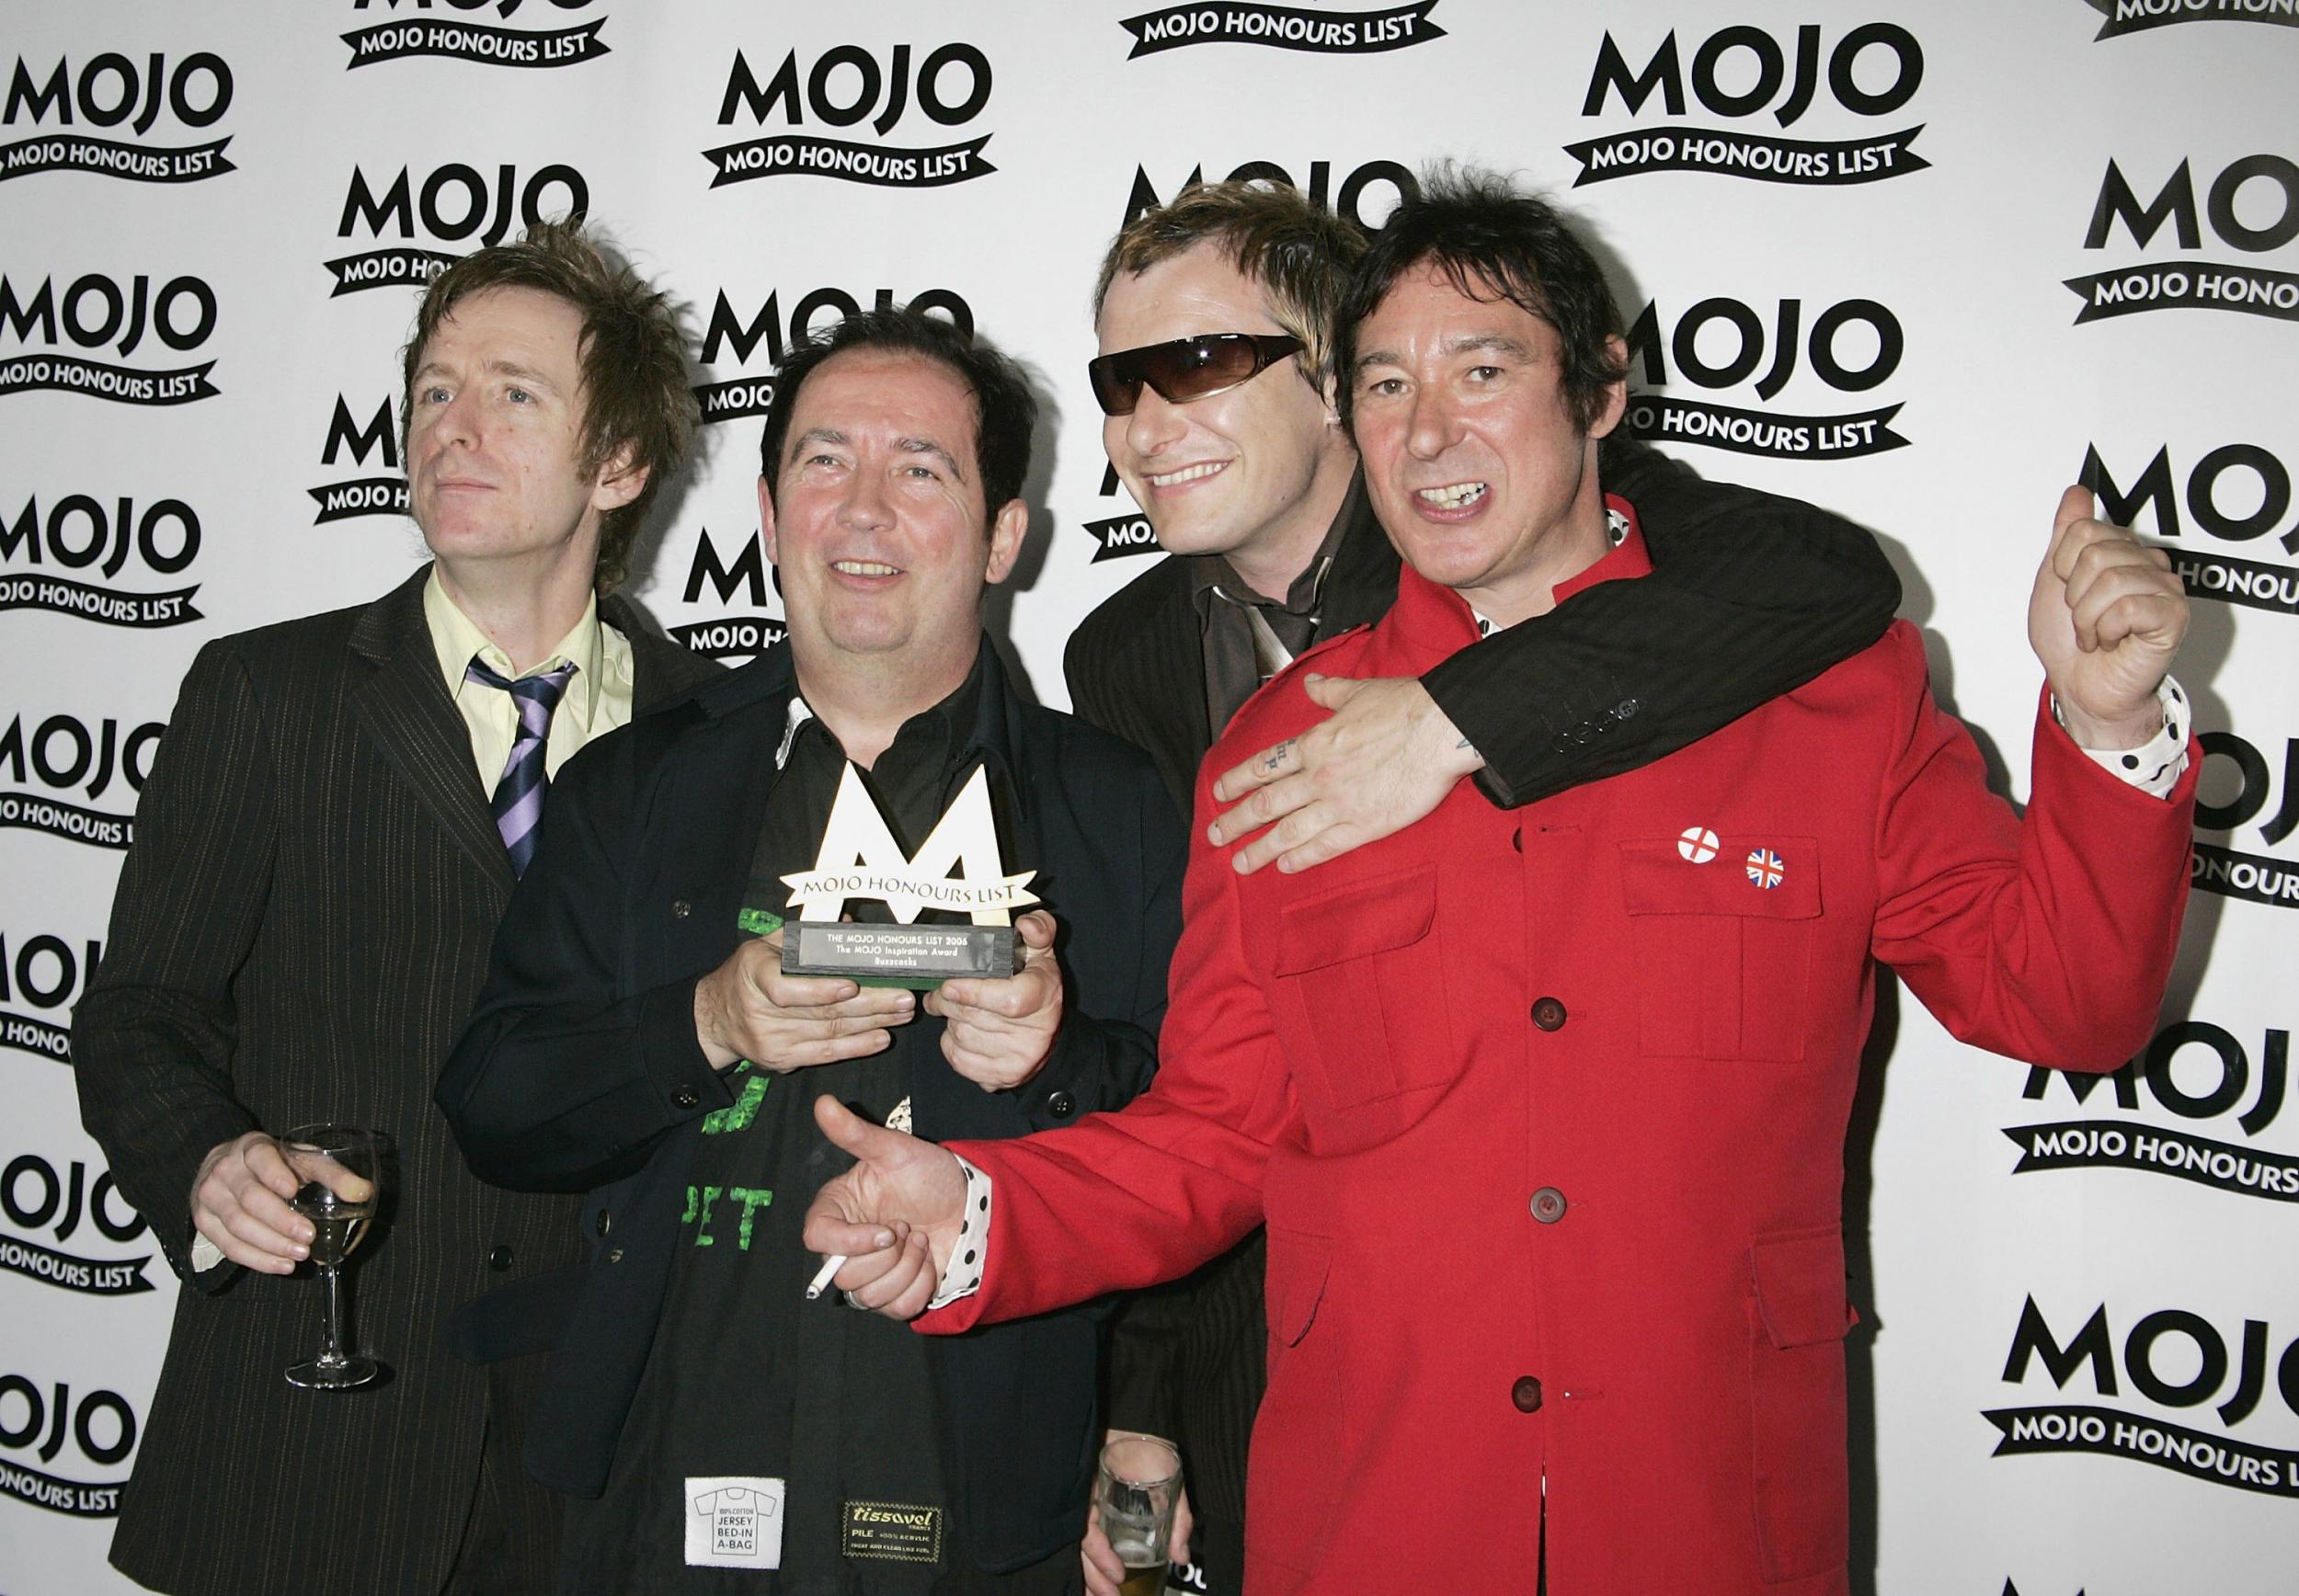 Shelley (second left), and fellow Buzzcocks Danny Farrant, Steve Garvey and Steve Diggle pose with The Mojo Inspiration Award in June 2006